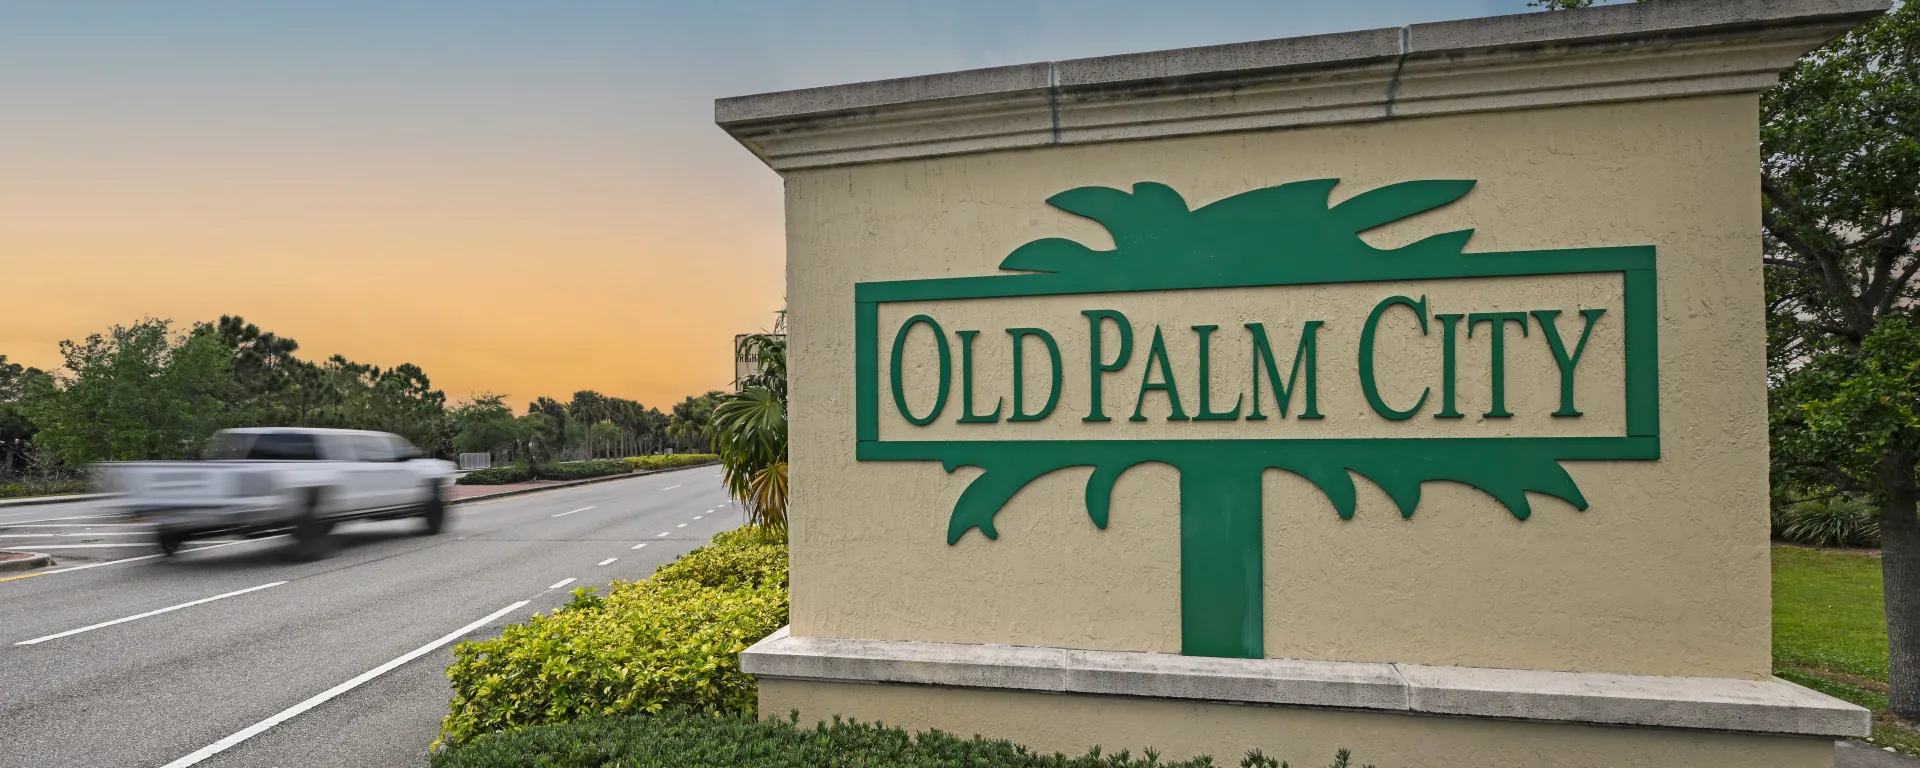 Image of the Old Palm City CRA welcome sign.